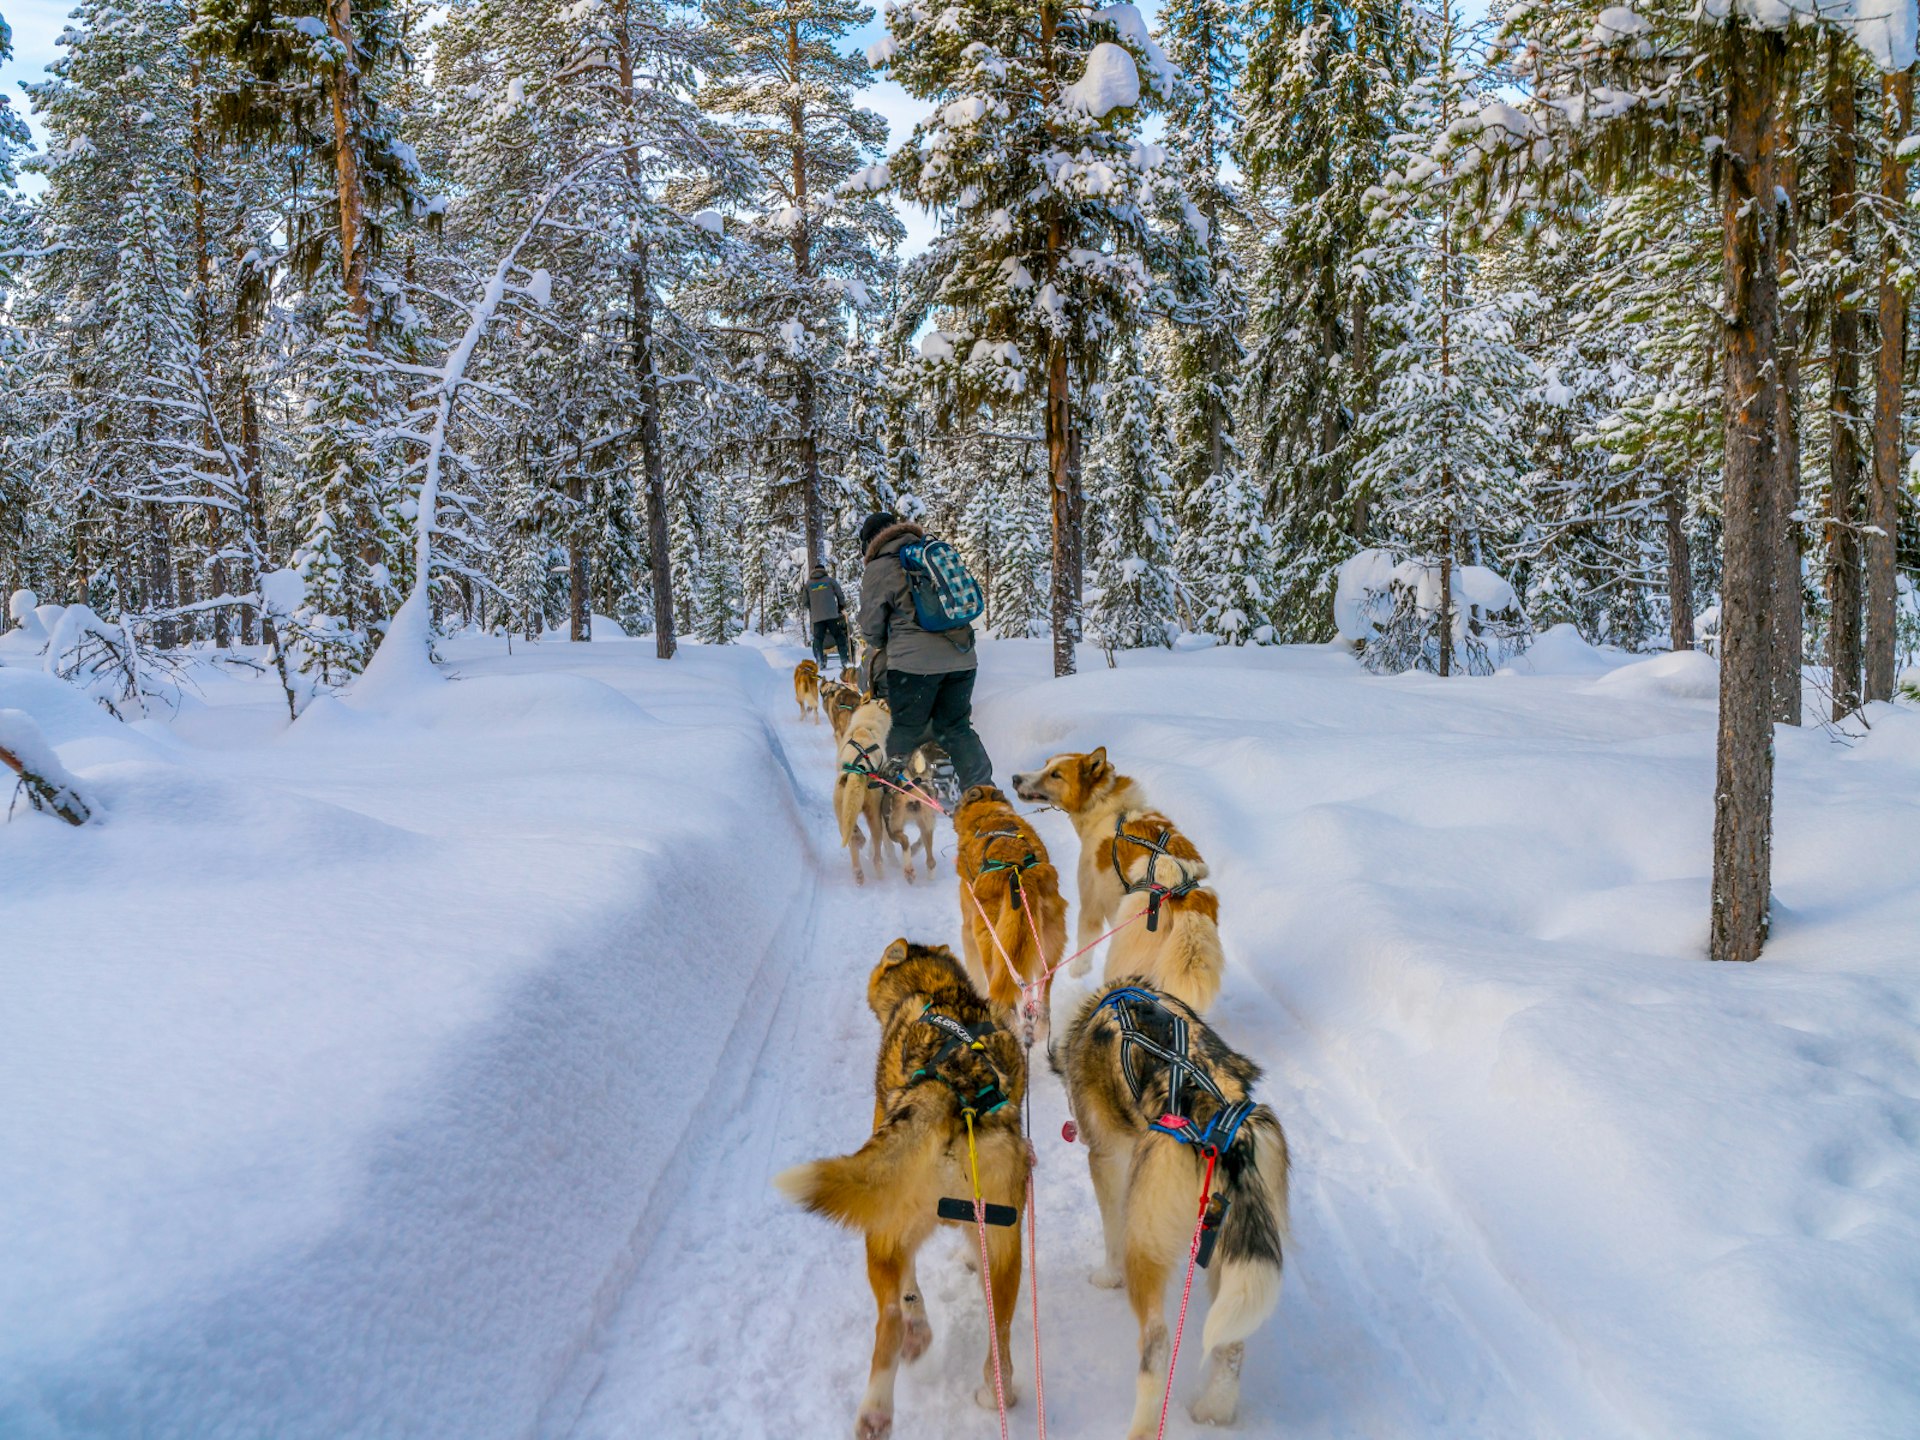 A pack of dogs pulling a sled through Sweden's snowy countryside